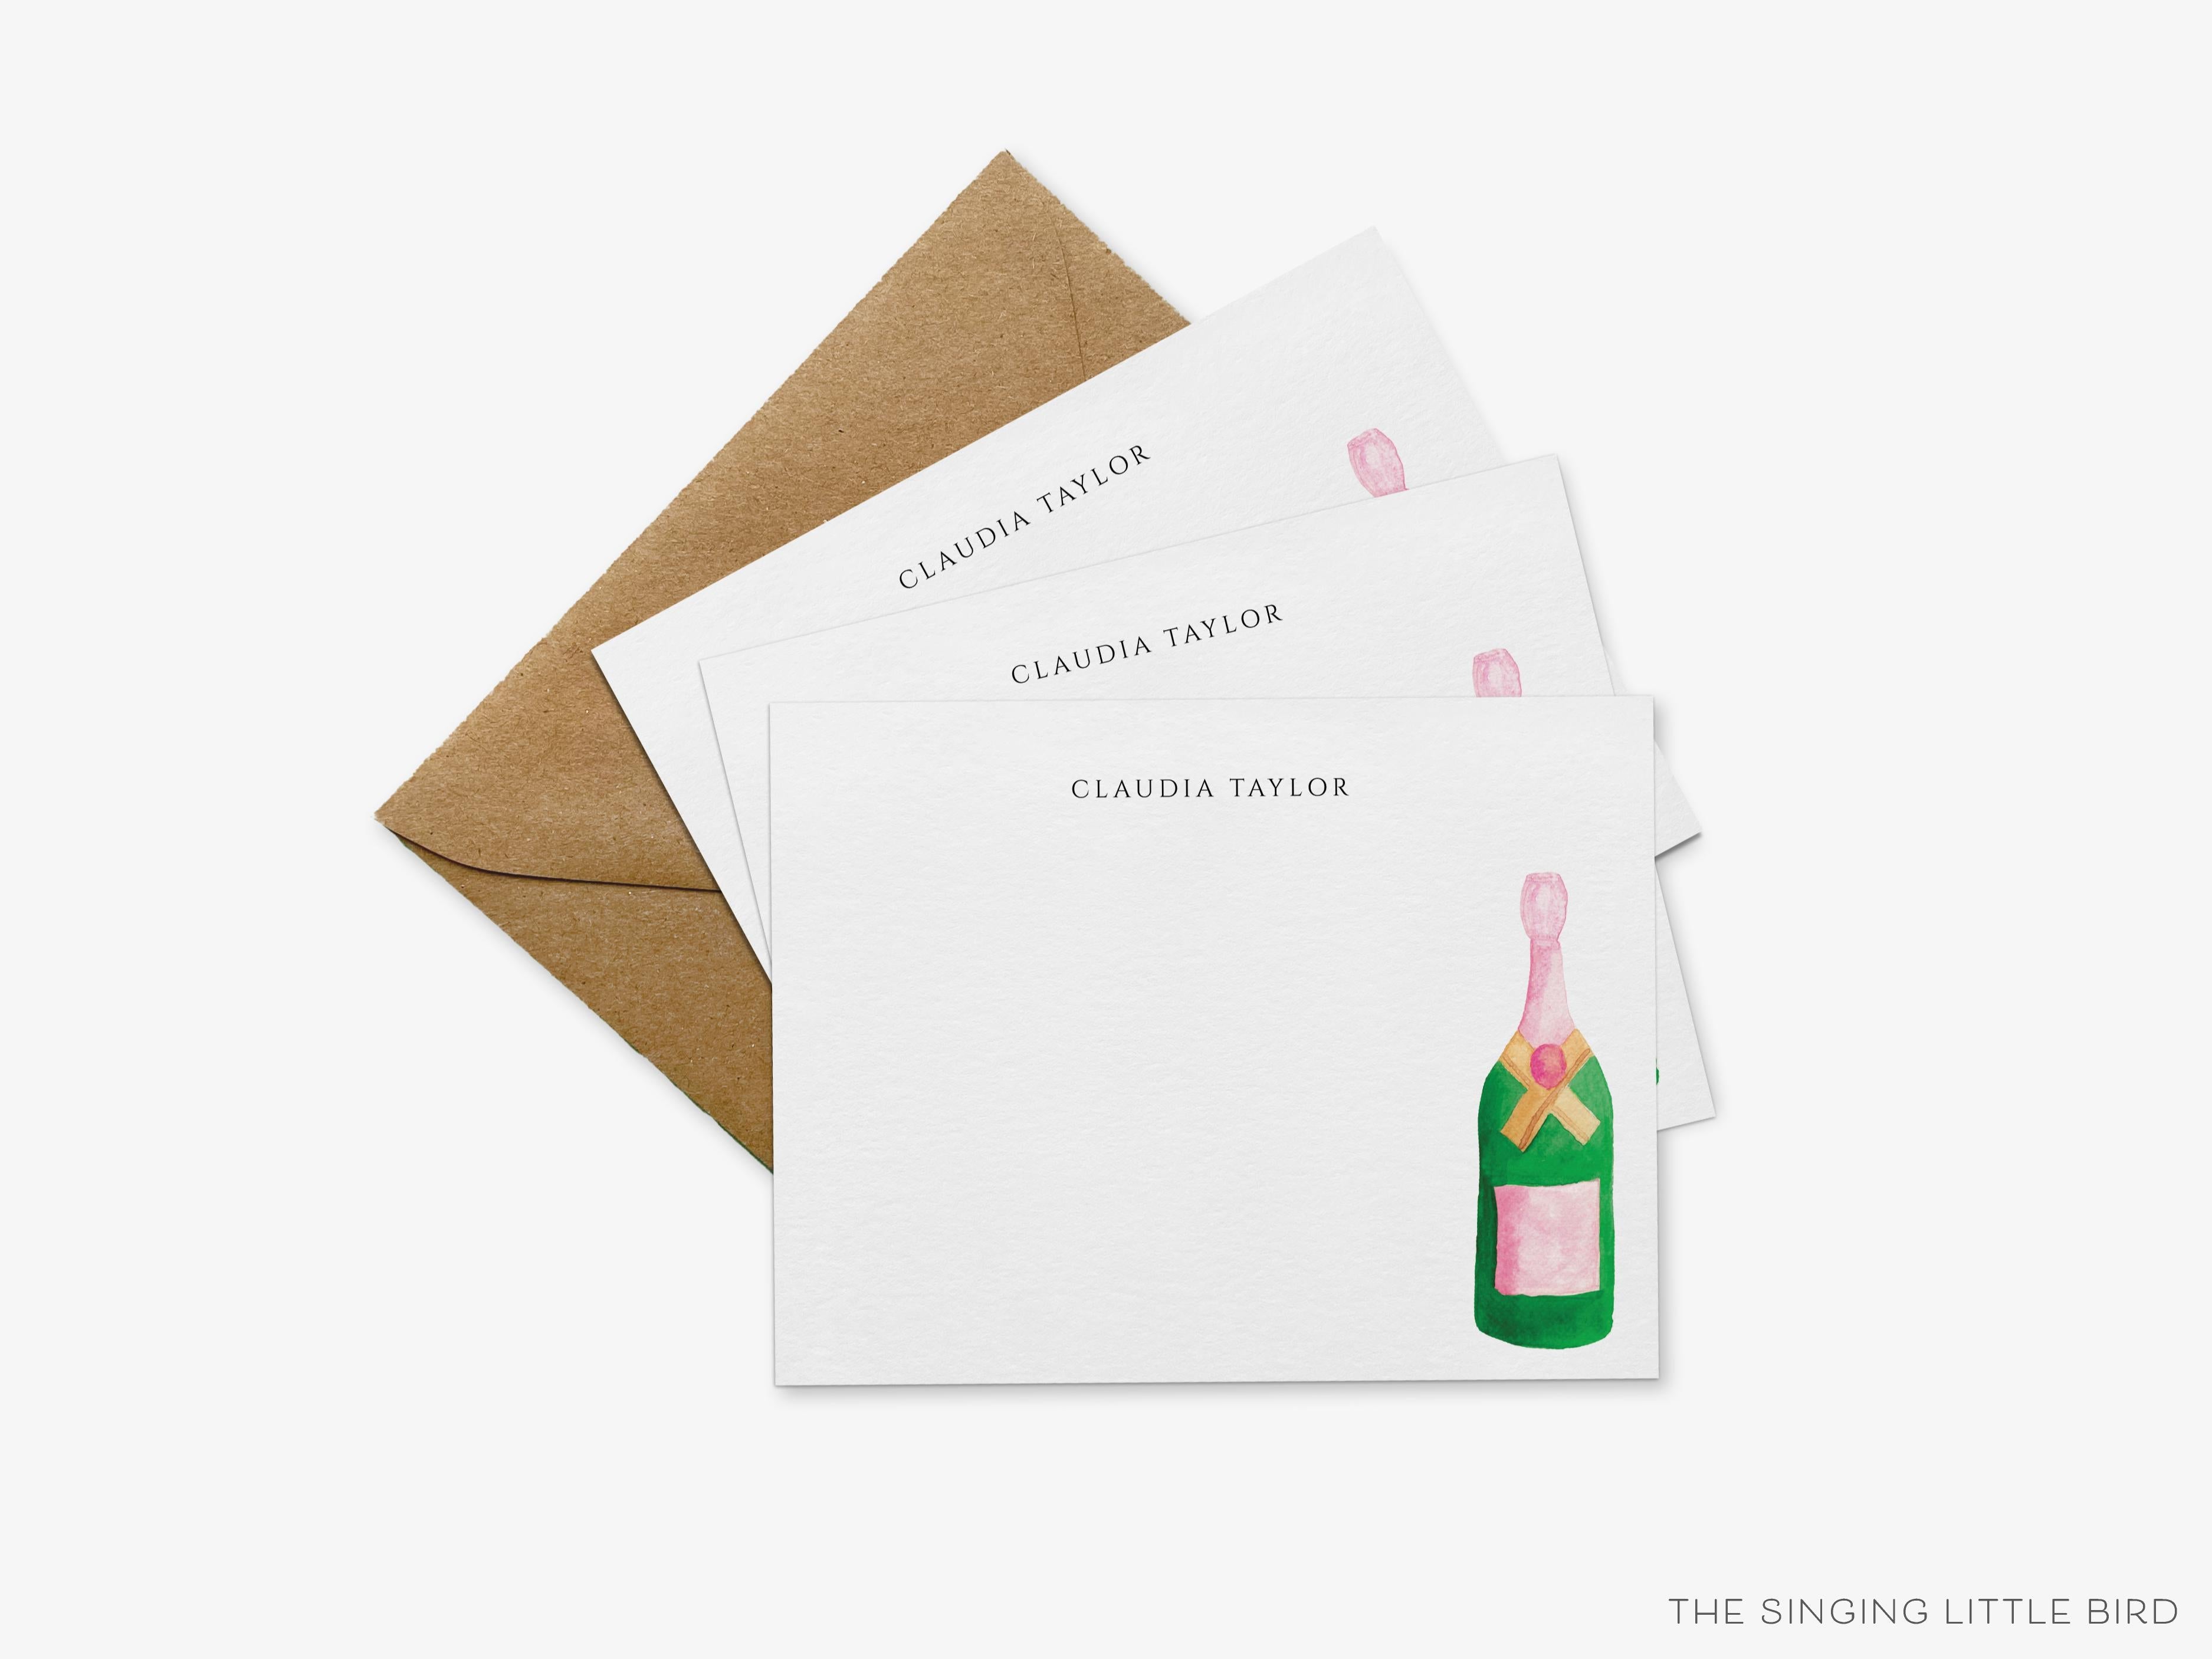 Personalized Champagne Bottle Flat Notes-These personalized flat notecards are 4.25x5.5 and feature our hand-painted watercolor champagne bottle, printed in the USA on 120lb textured stock. They come with your choice of envelopes and make great thank yous and gifts for the bubbly lover in your life.-The Singing Little Bird